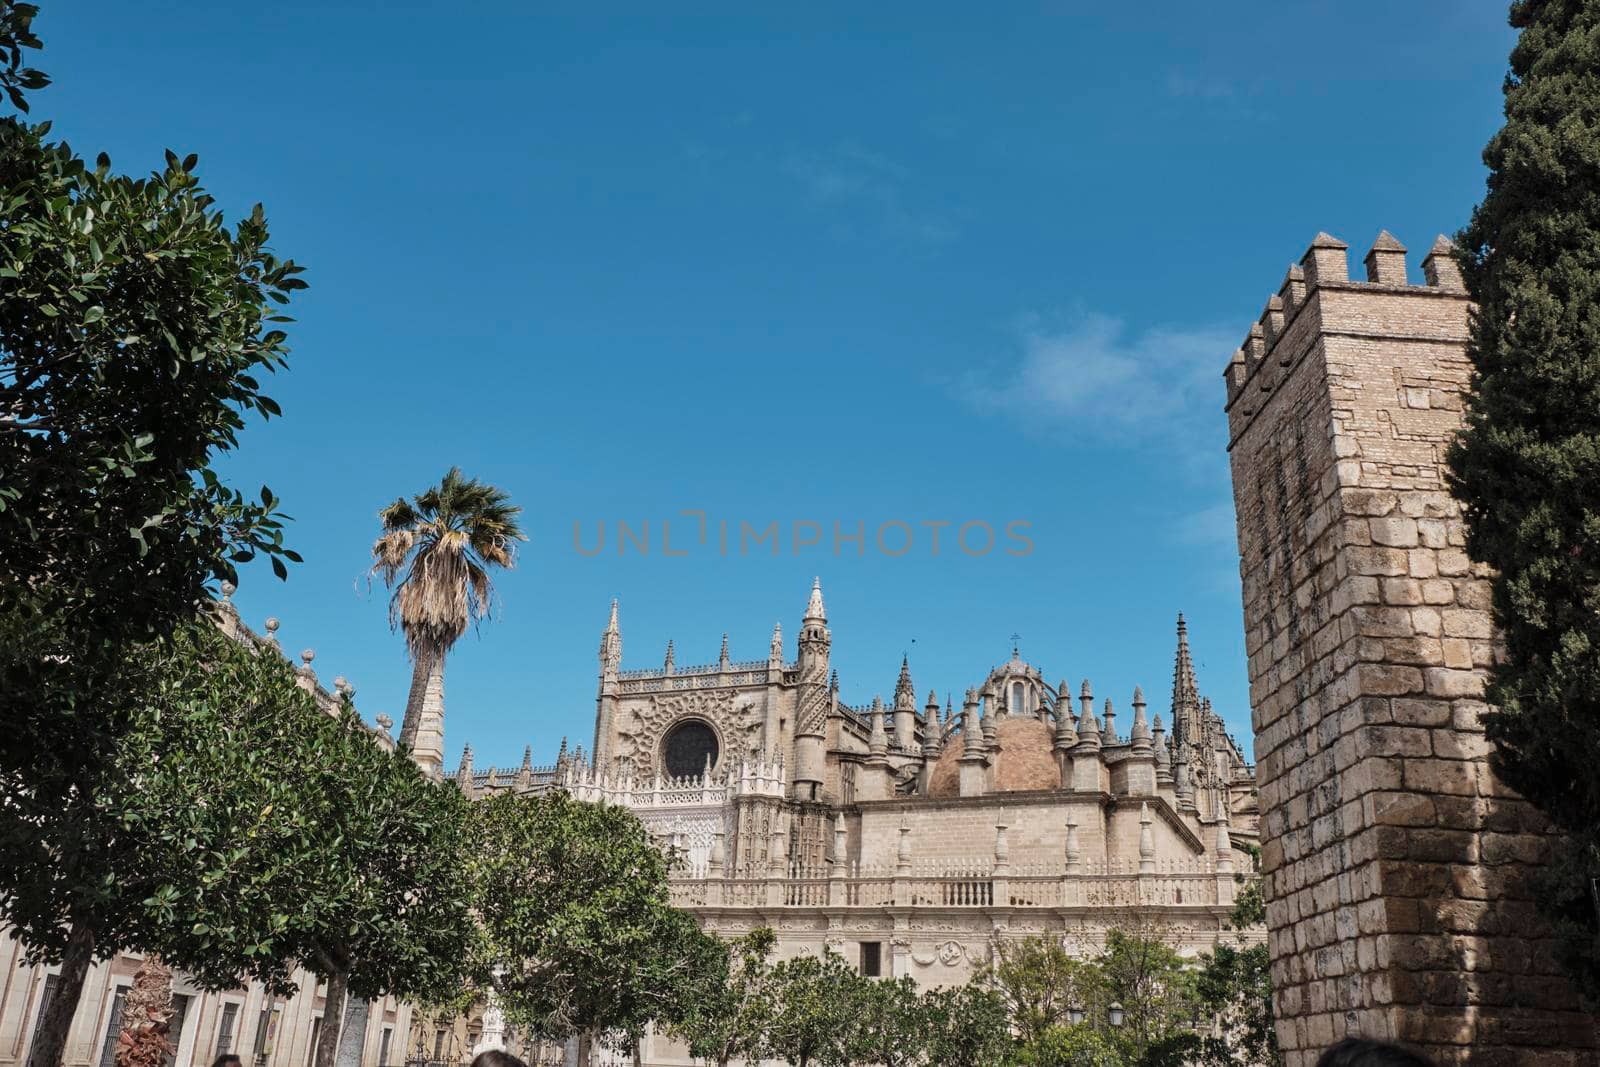 Cathedral of Saint Mary of the See (Seville Cathedral) in Seville, Andalusia, Spain in a sunny and cloudy day. by Sandronize